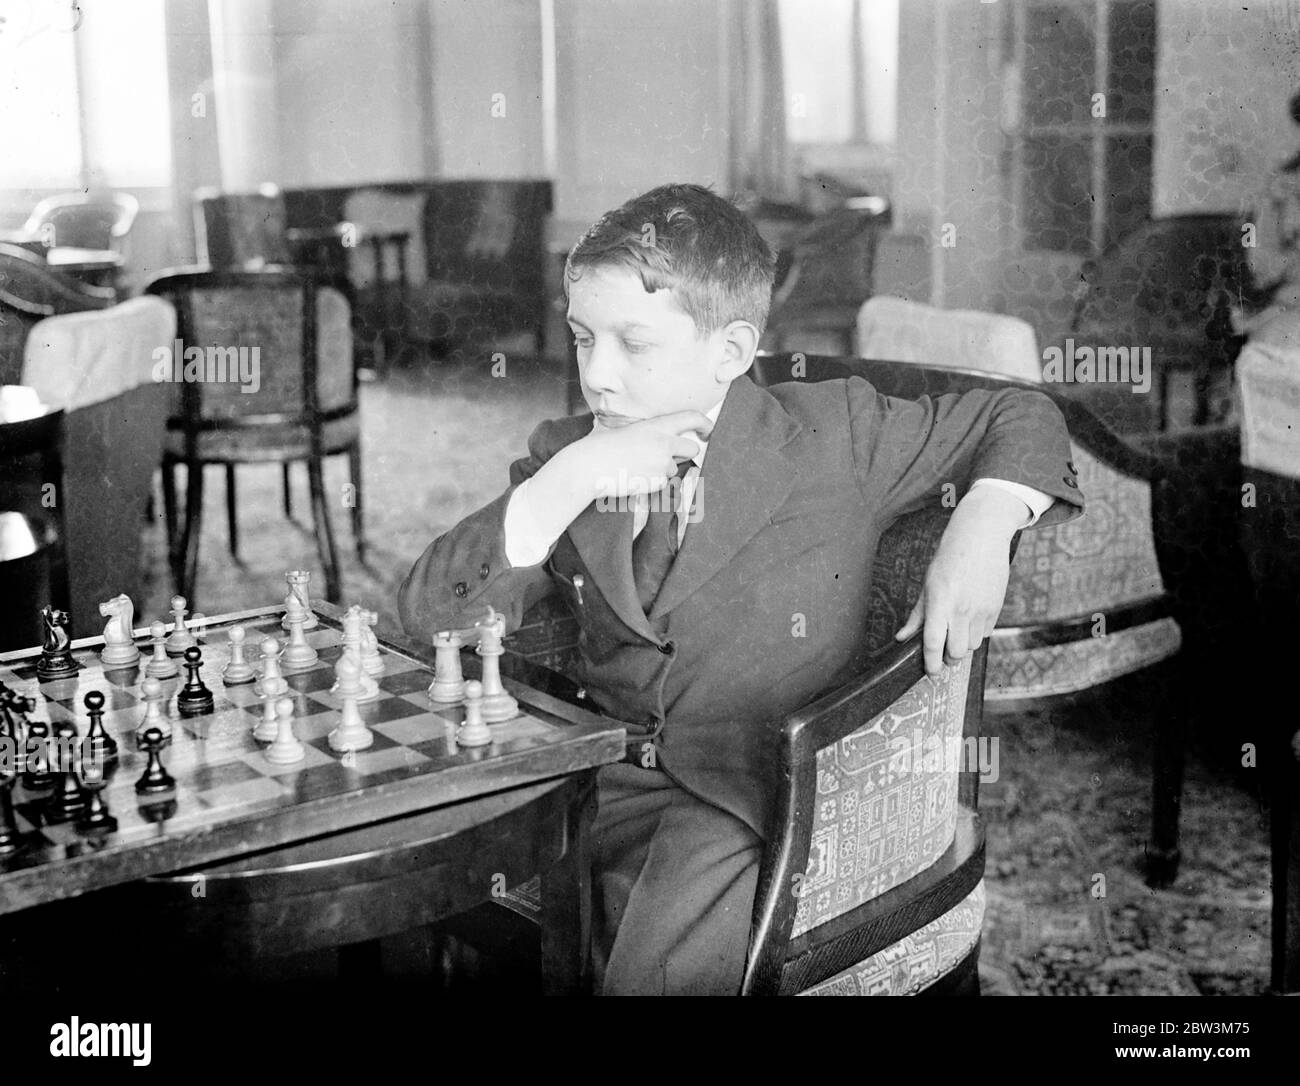 13 1 / 2 year old competitor in Margate chess congress . Chess champions from every part of the world are competing in the second annual Chess Congress which has opened at the Grand Hotel , Margate . One player has established a new record by travelling from the Philippine Islands to compete . The youngest competitor is Miss Elaine Saunders aged 10 . Photo shows , John Leach Lewis , aged 13 1 / 2 puzzles a move against Elaine Saunders . 16 April 1936 Stock Photo